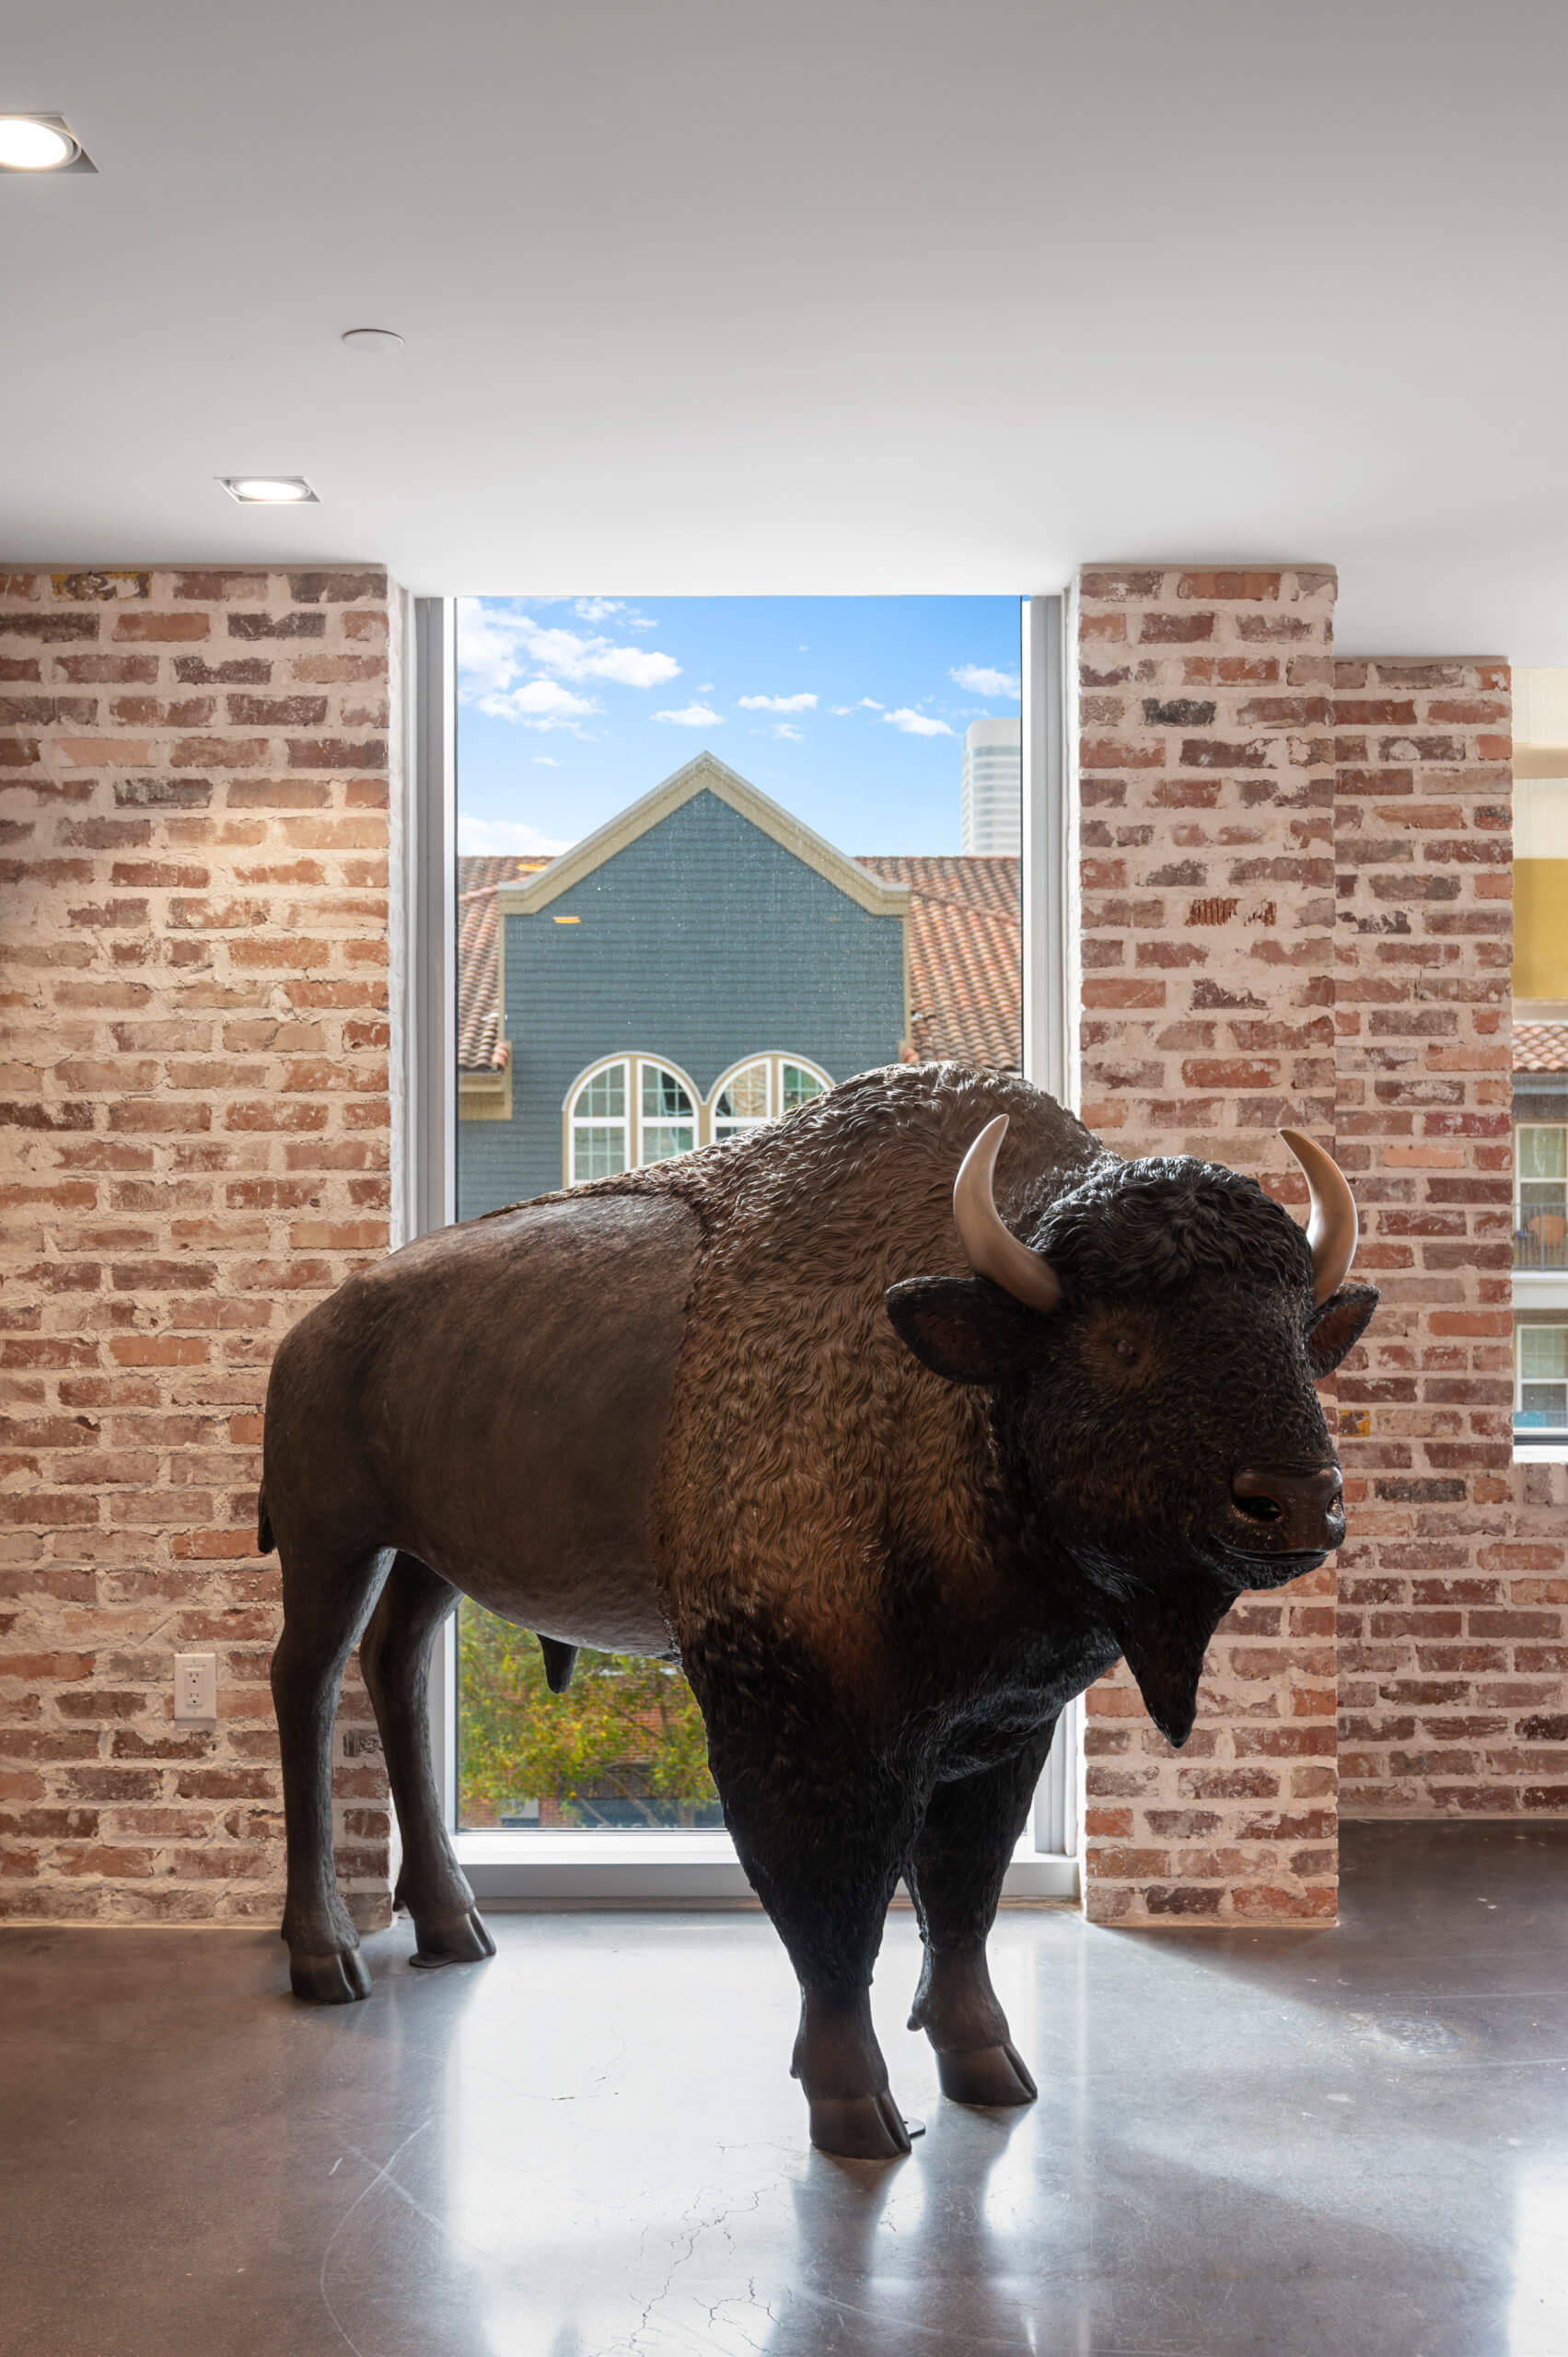 Life-size bison figure in front of a window at St. Andrie.